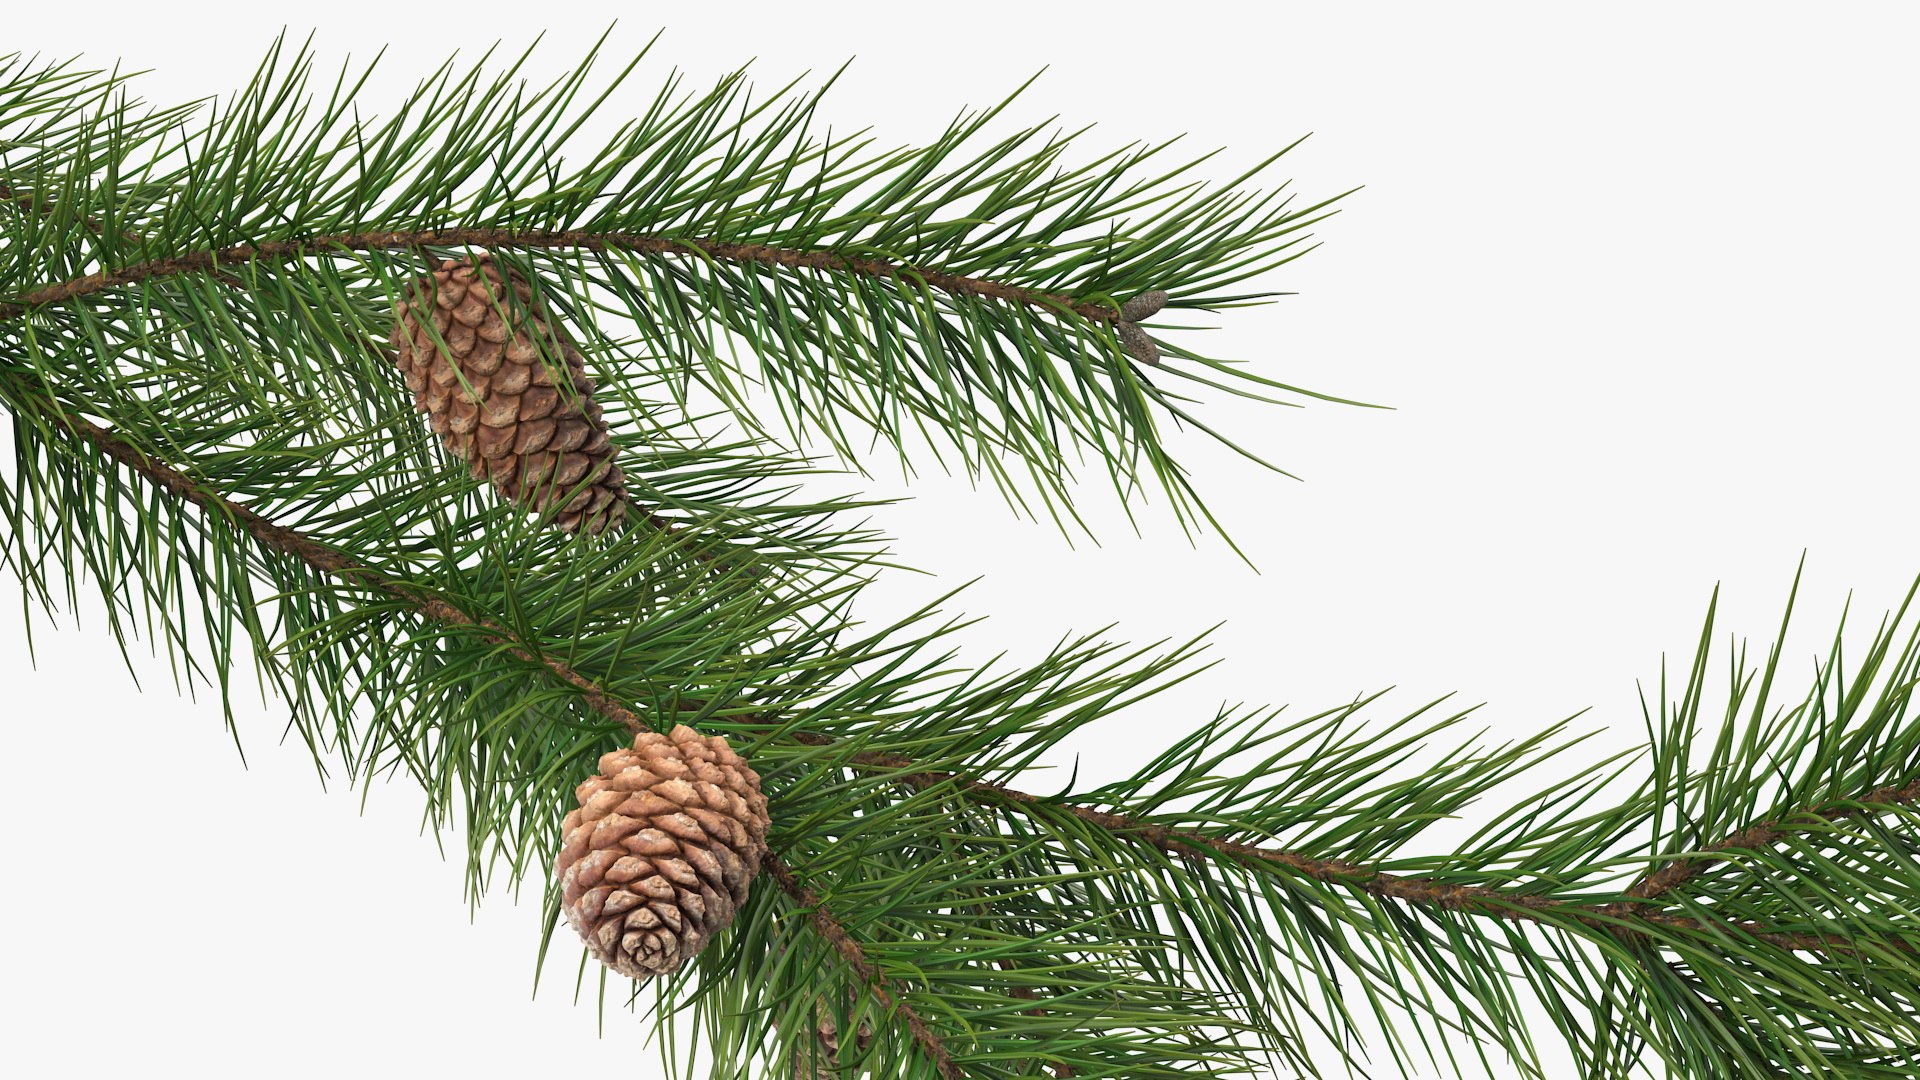 1,453,869 Pine Branch Images, Stock Photos, 3D objects, & Vectors